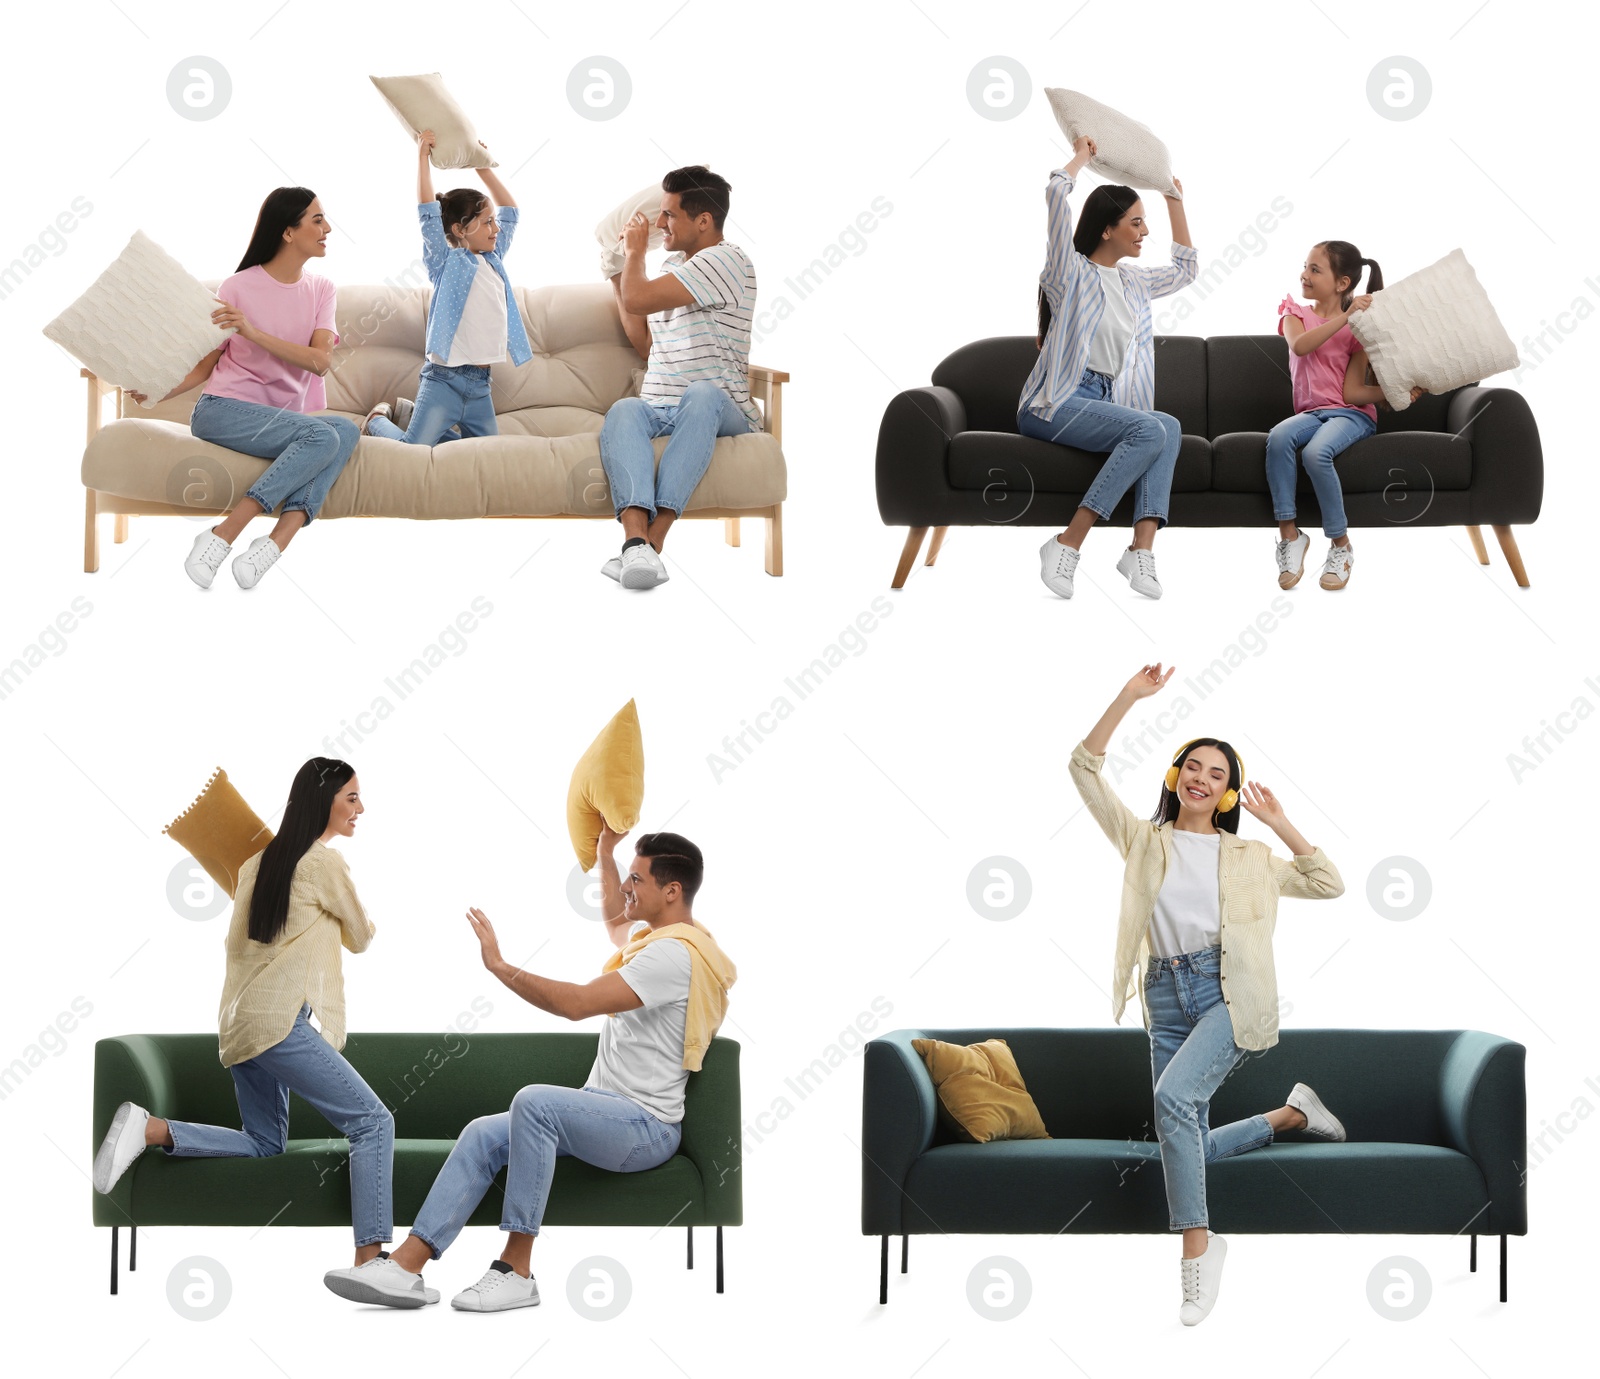 Image of People resting on different stylish sofas against white background, collage 